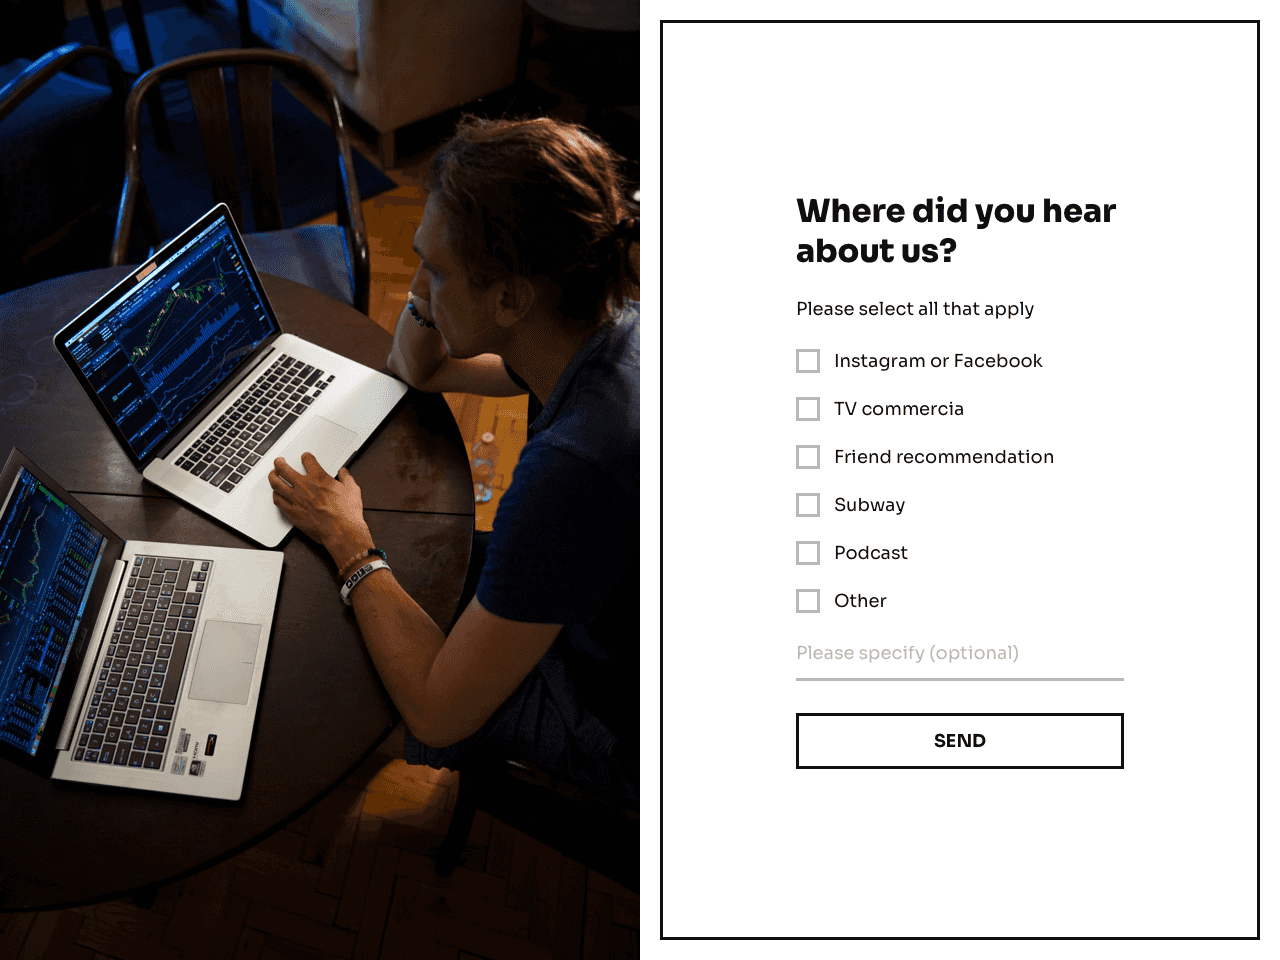 Simple “Where did you hear about us” survey form with checkboxes